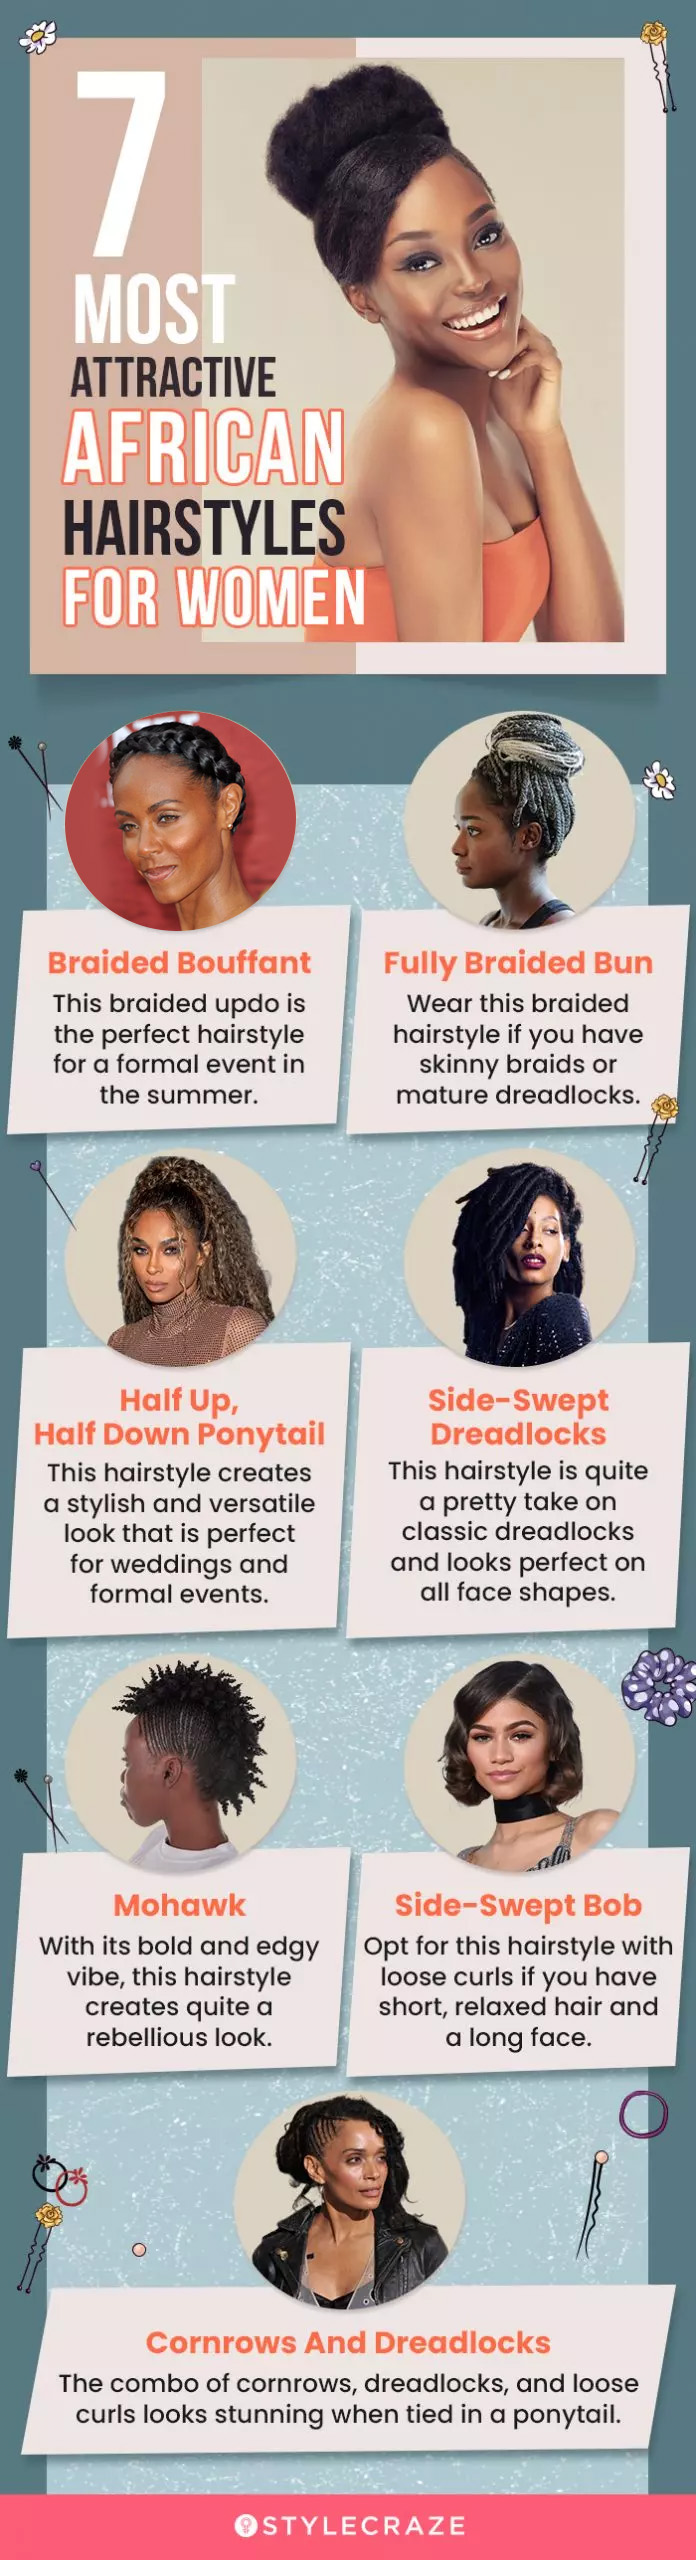 7 most attractive african hairstyles for women (infographic)